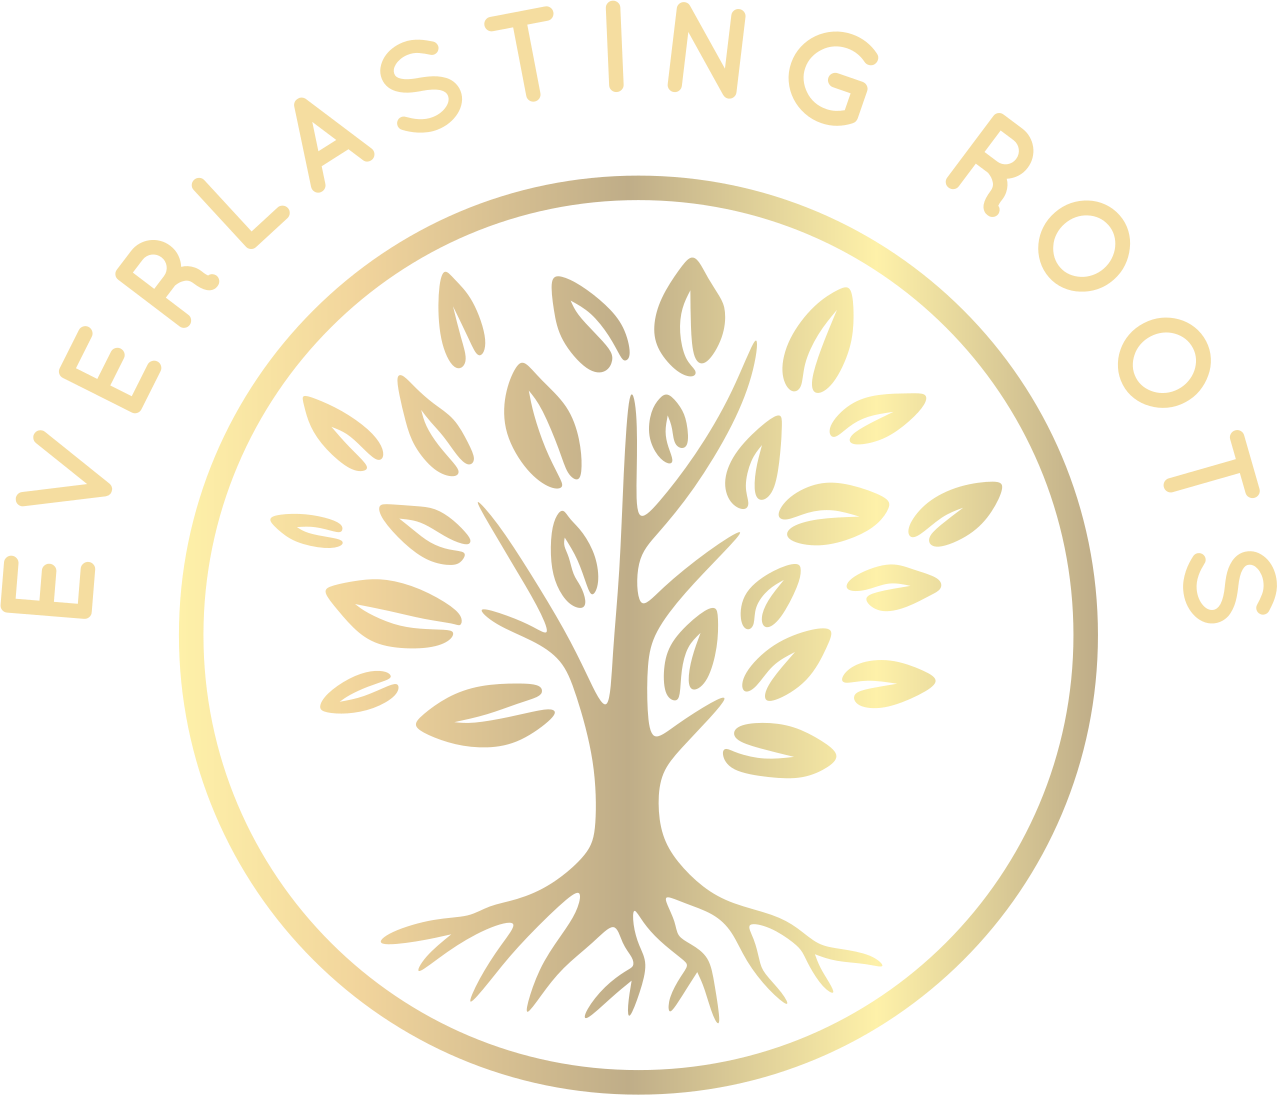 EVERLASTING ROOTS's web page